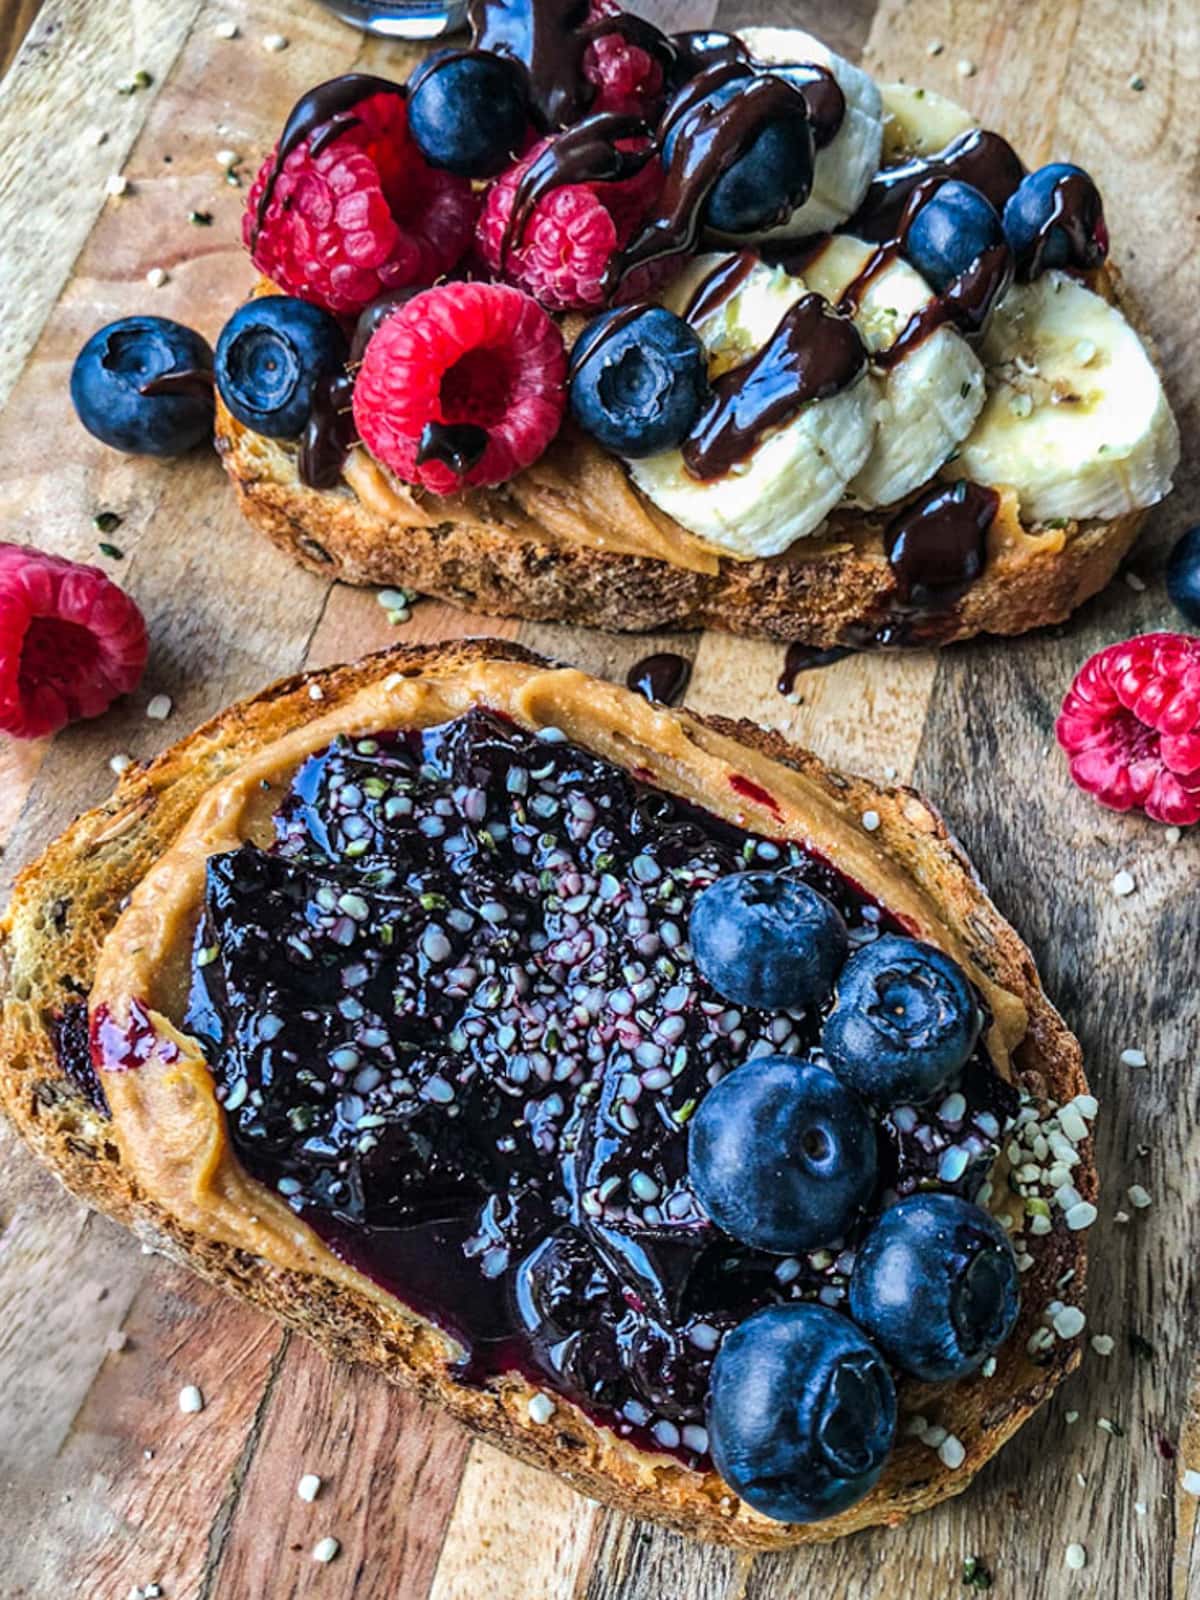 Sourdough toast with peanut butter, jam, and fresh fruit.